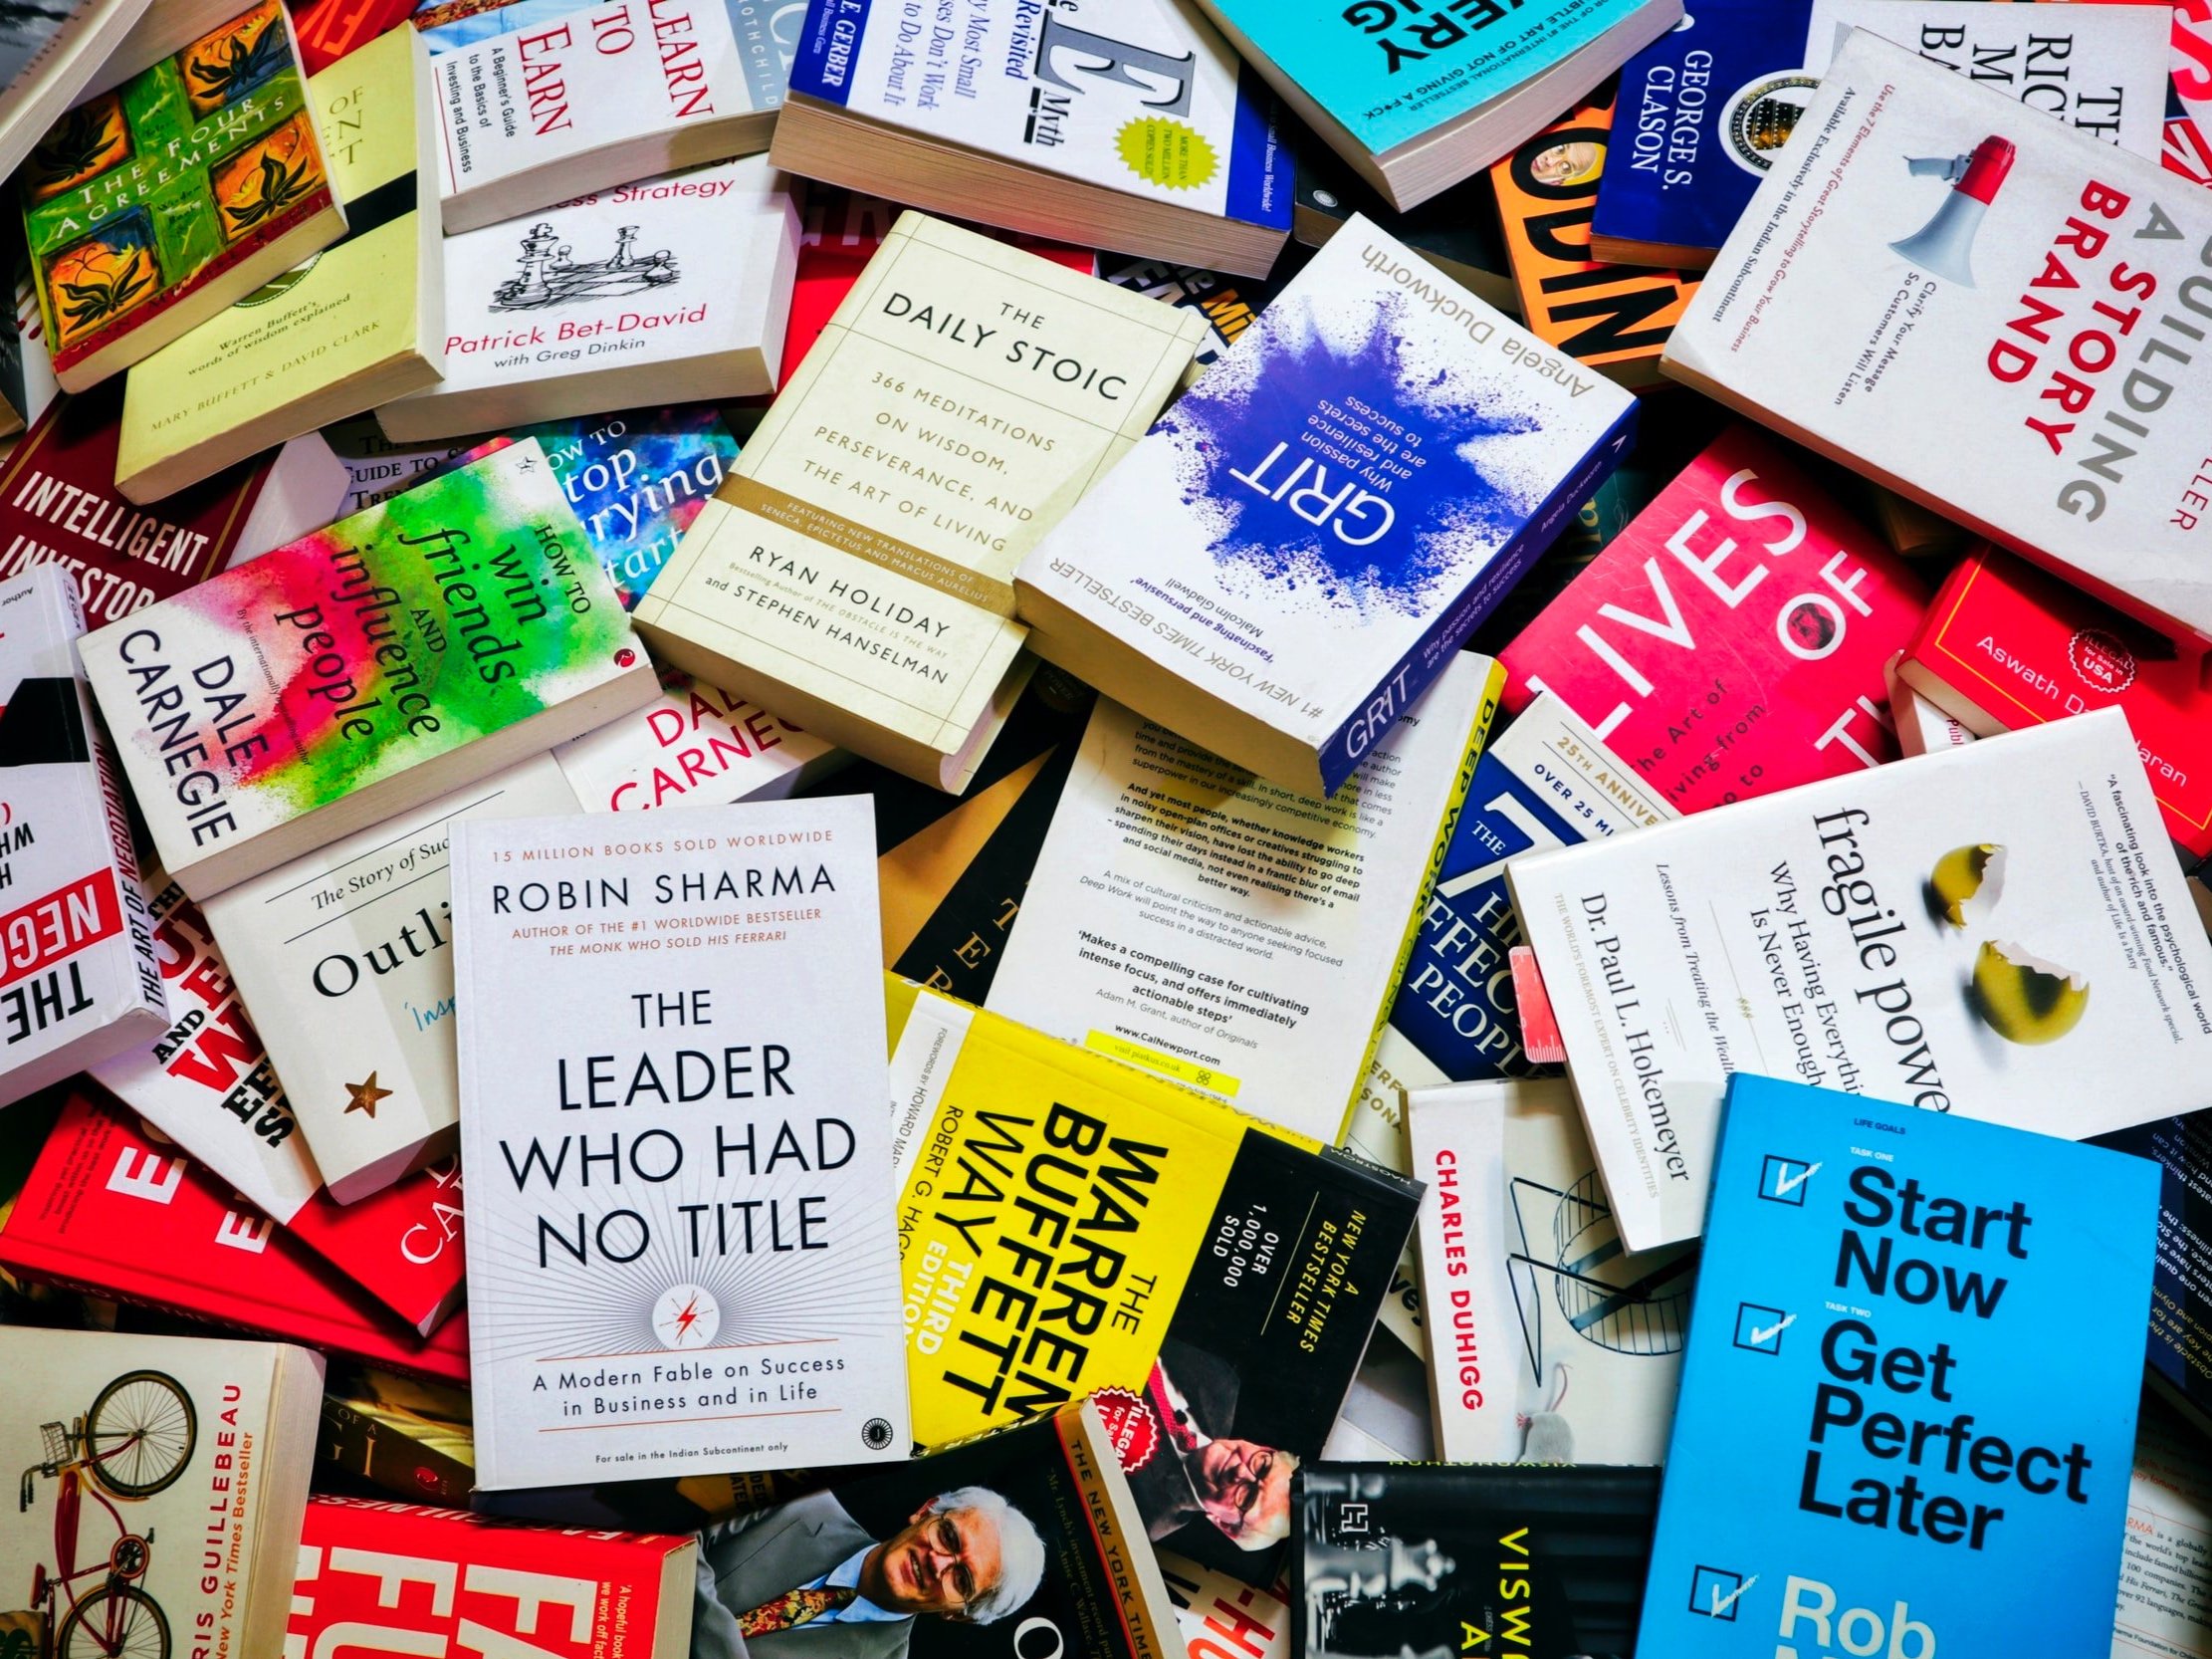 A large collection of productivity and self-help books